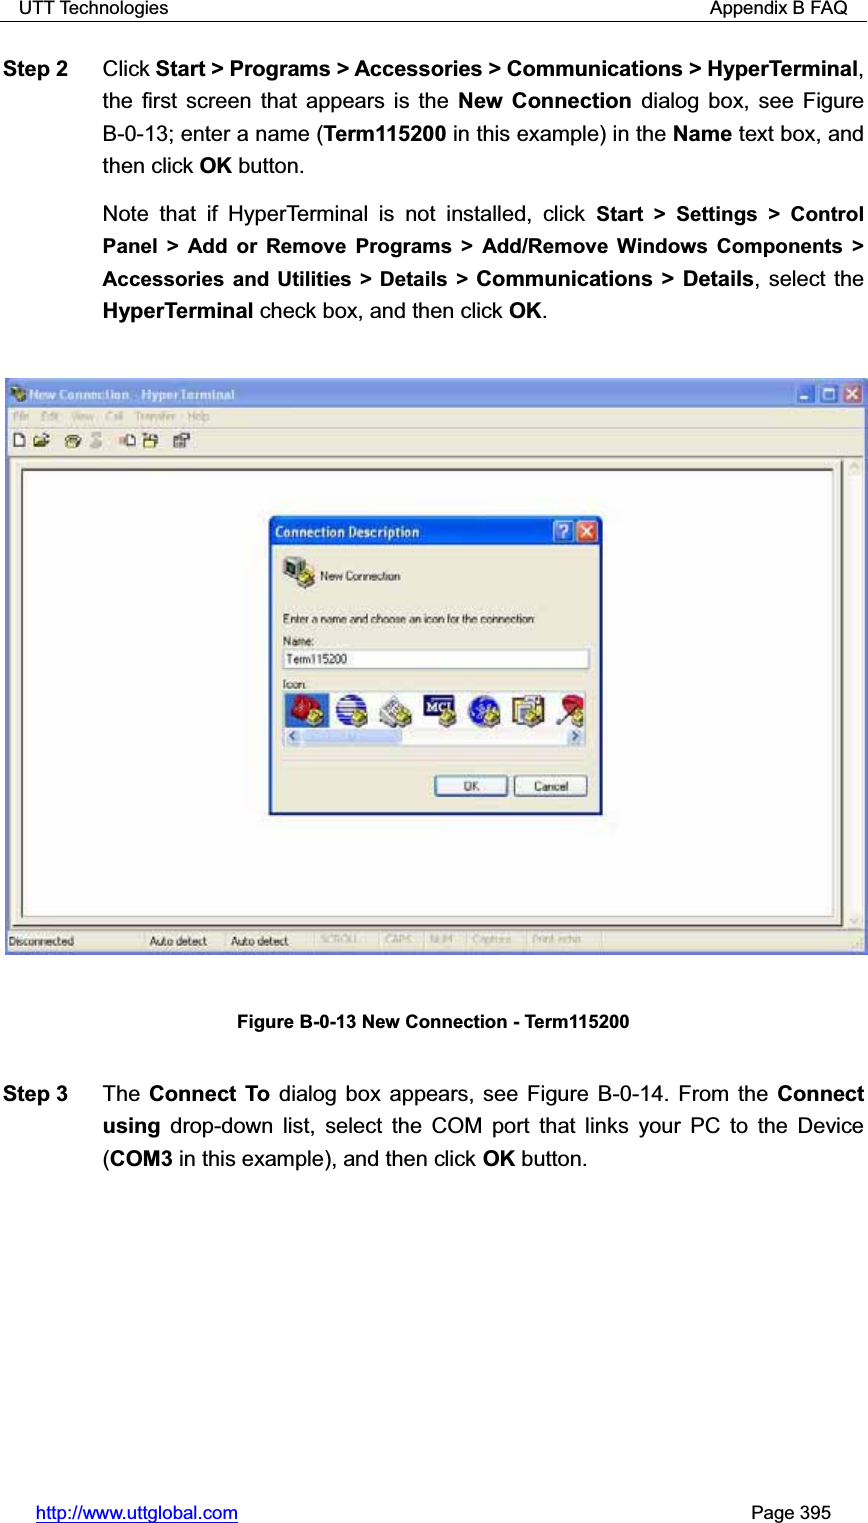 UTT Technologies                                                          Appendix B FAQ http://www.uttglobal.com                                                       Page 395 Step 2  Click Start &gt; Programs &gt; Accessories &gt; Communications &gt; HyperTerminal,the first screen that appears is the New Connection dialog box, see Figure B-0-13; enter a name (Term115200 in this example) in the Name text box, and then click OK button.  Note that if HyperTerminal is not installed, click Start &gt; Settings &gt; Control Panel &gt; Add or Remove Programs &gt; Add/Remove Windows Components &gt; Accessories and Utilities &gt; Details &gt; Communications &gt; Details, select the HyperTerminal check box, and then click OK.Figure B-0-13 New Connection - Term115200 Step 3  The Connect To dialog box appears, see Figure B-0-14. From the Connect using drop-down list, select the COM port that links your PC to the Device (COM3 in this example), and then click OK button. 